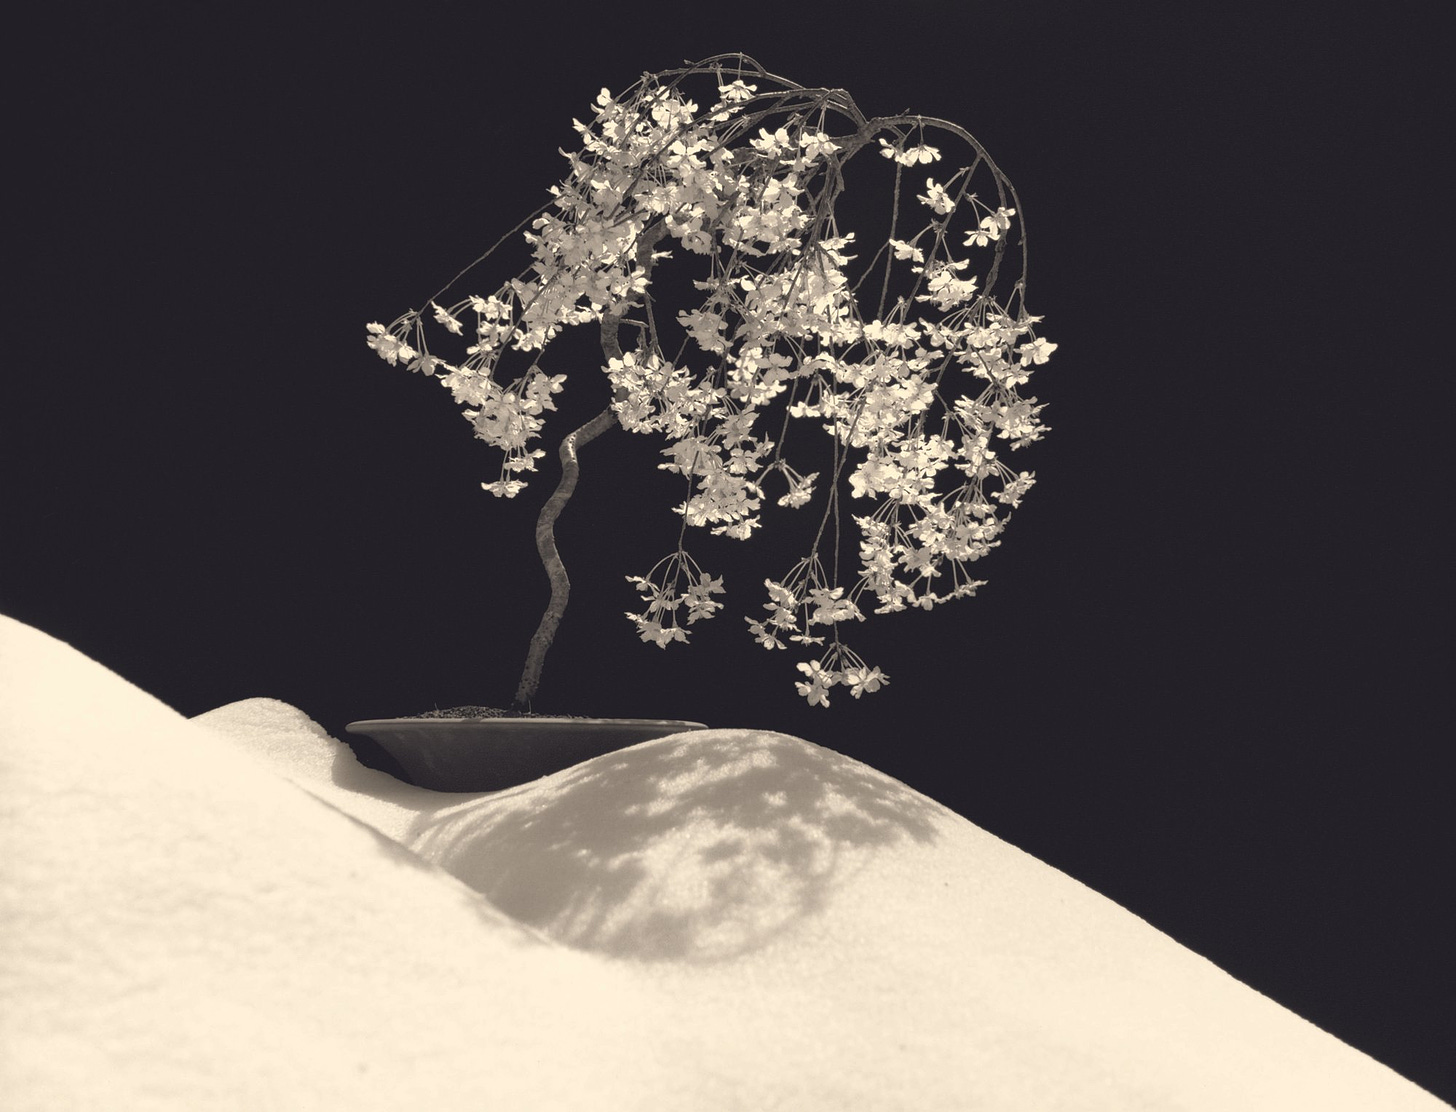 a bonsai appears against a black background, either on sand or snow; the whole print is sepia-toned